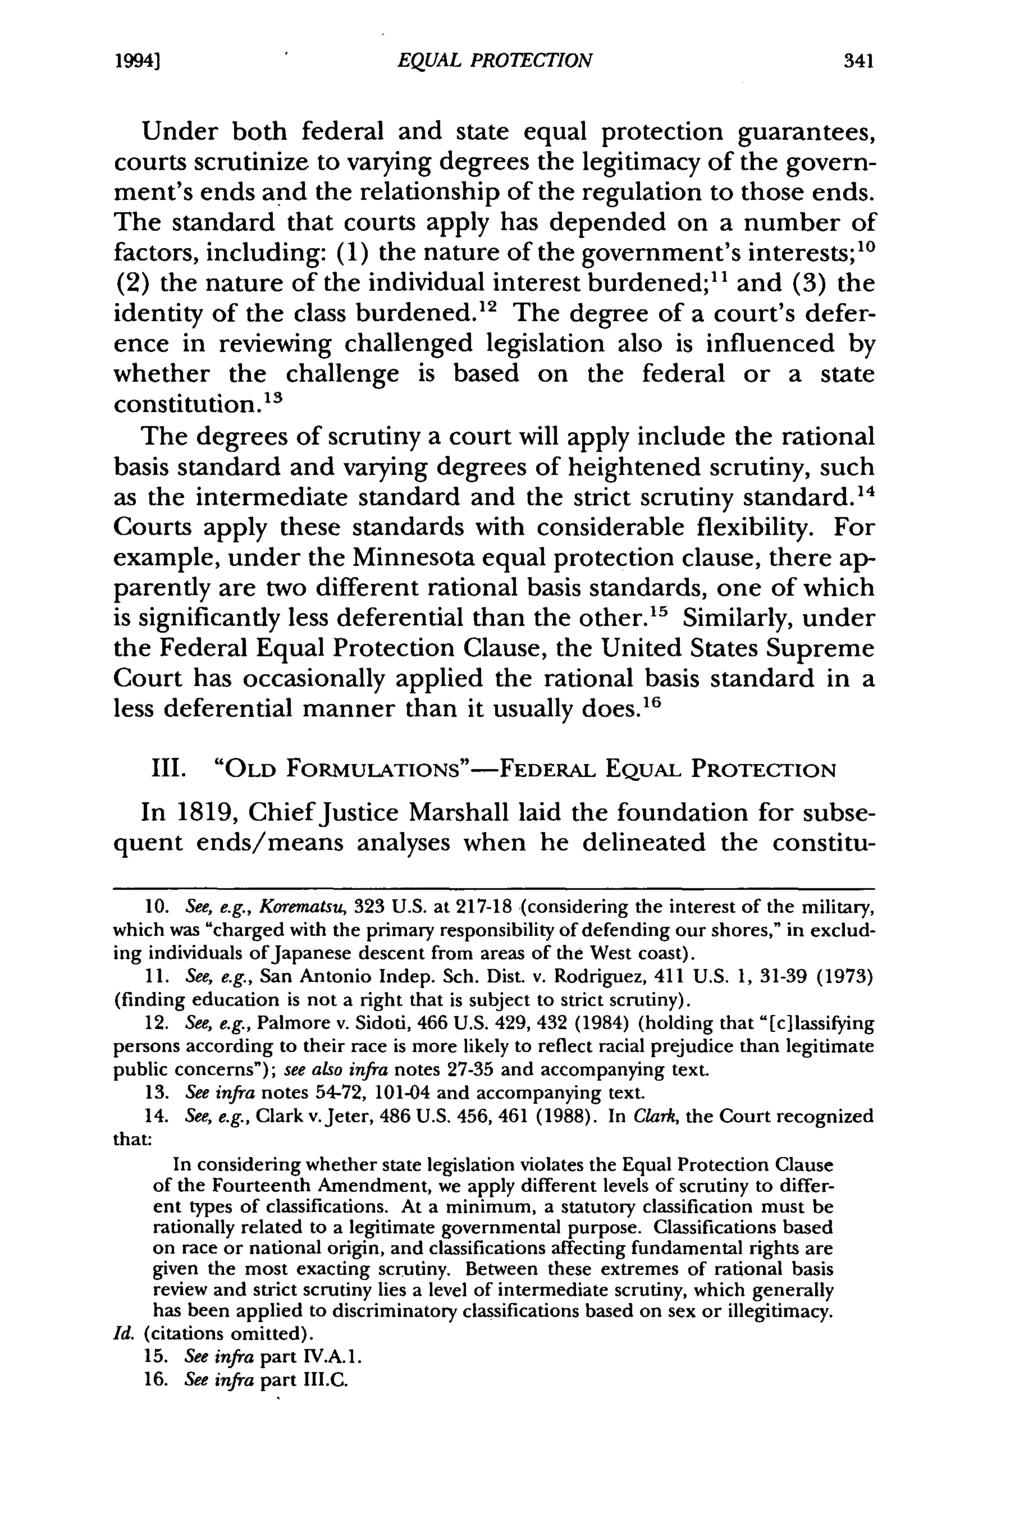 1994] Iijima: Minnesota Equal EQUAL Protection PROTECTION in the Third Millennium: "Old Formulat Under both federal and state equal protection guarantees, courts scrutinize to varying degrees the